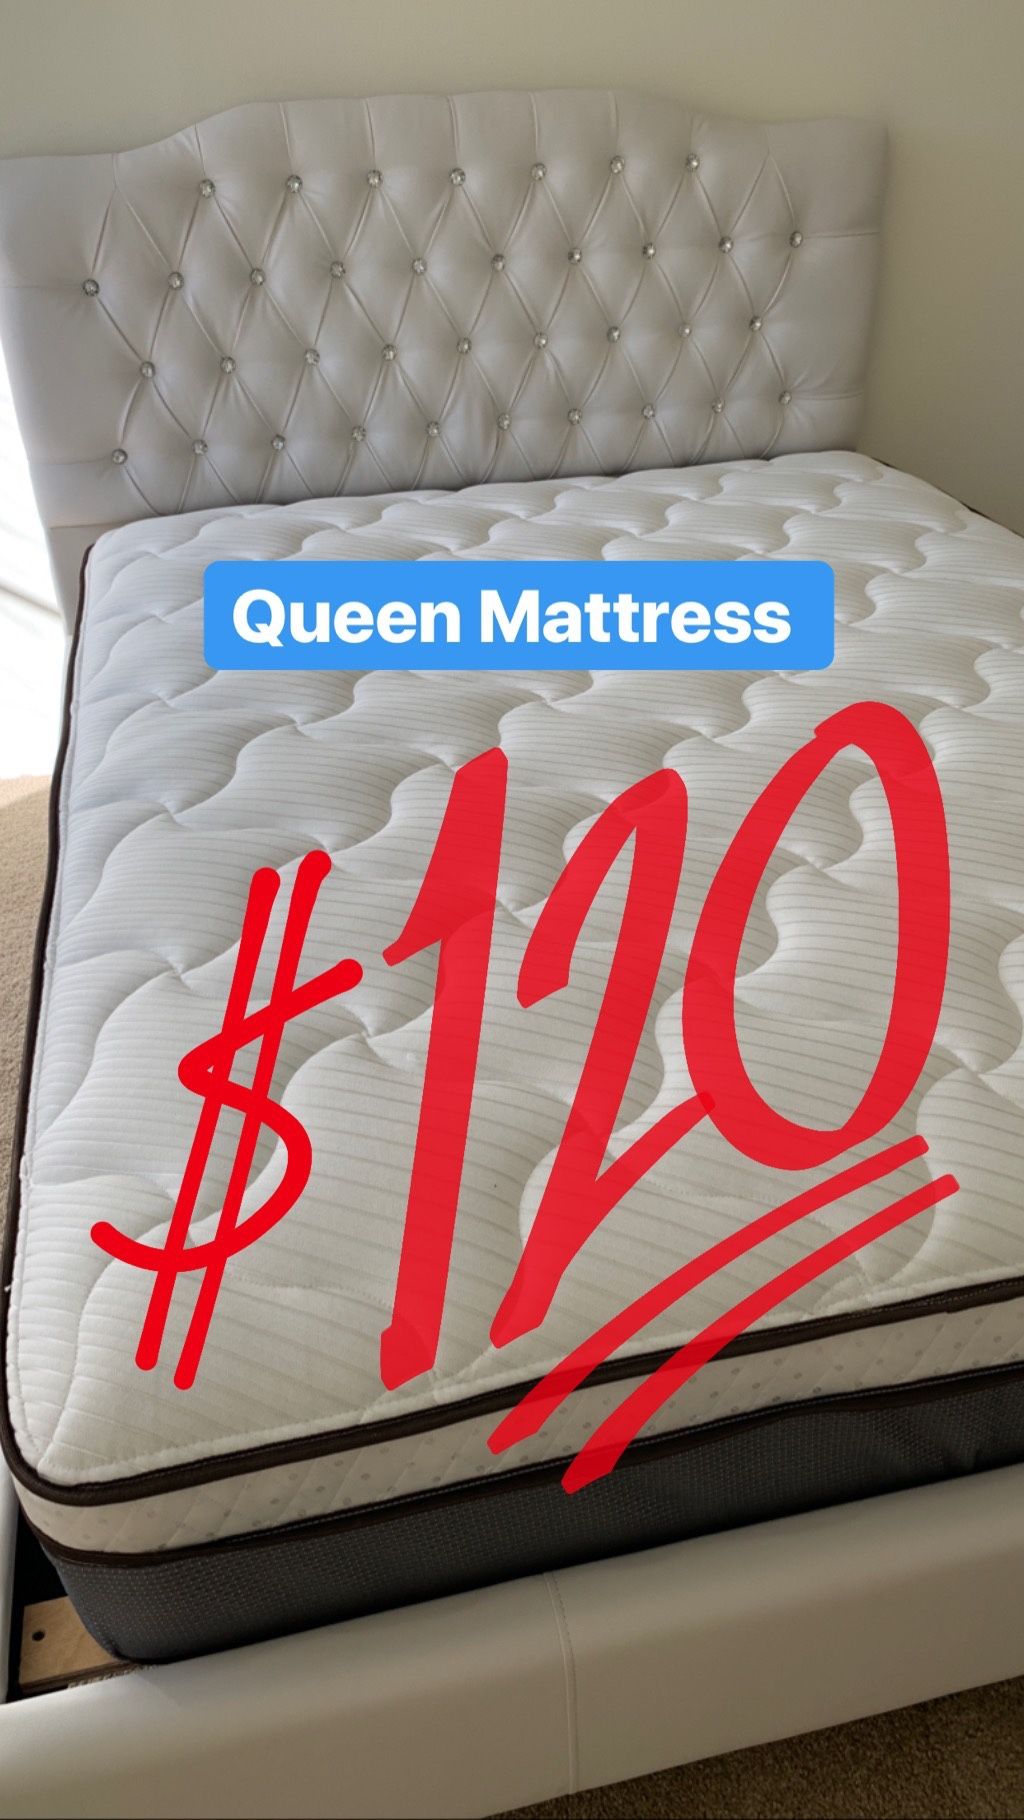 BRAND NEW PILLOW TOP MATTRESSES💯 COLCHONES NUEVOS PILLOW TOP 💯 Queen $120 ❌ $180 With Box Spring 💥💥 FULL SIZE $100 ❌ $150 With Box Spring💥 Twin $8